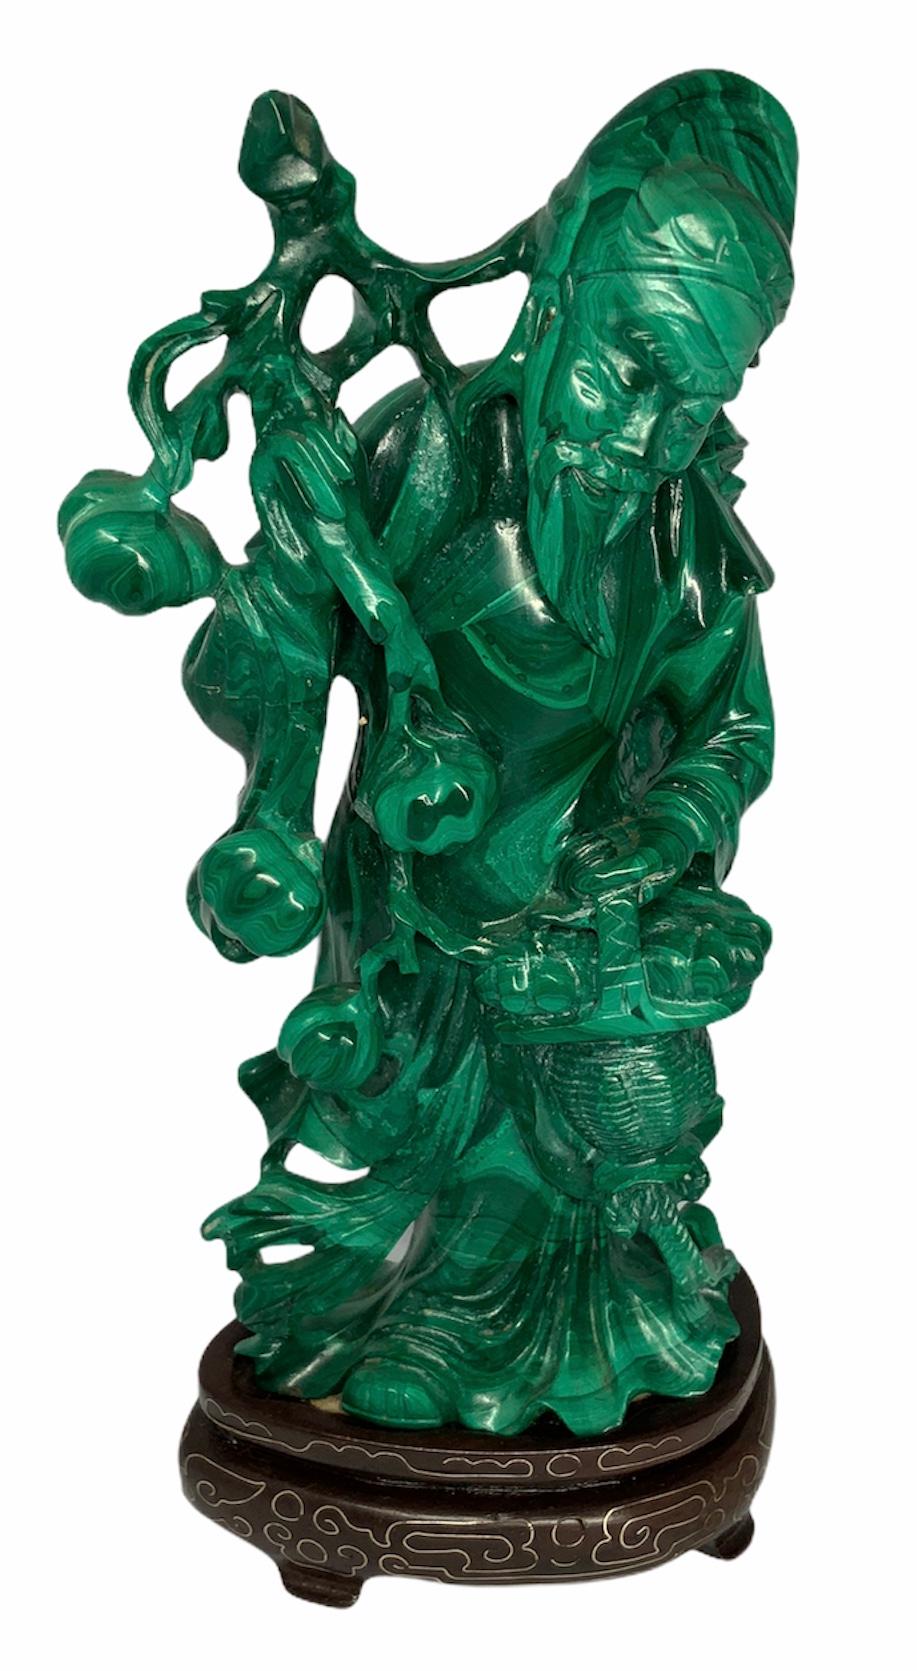 Hand-Carved Hand Carved Malachite Statue of Shou Xing Gong